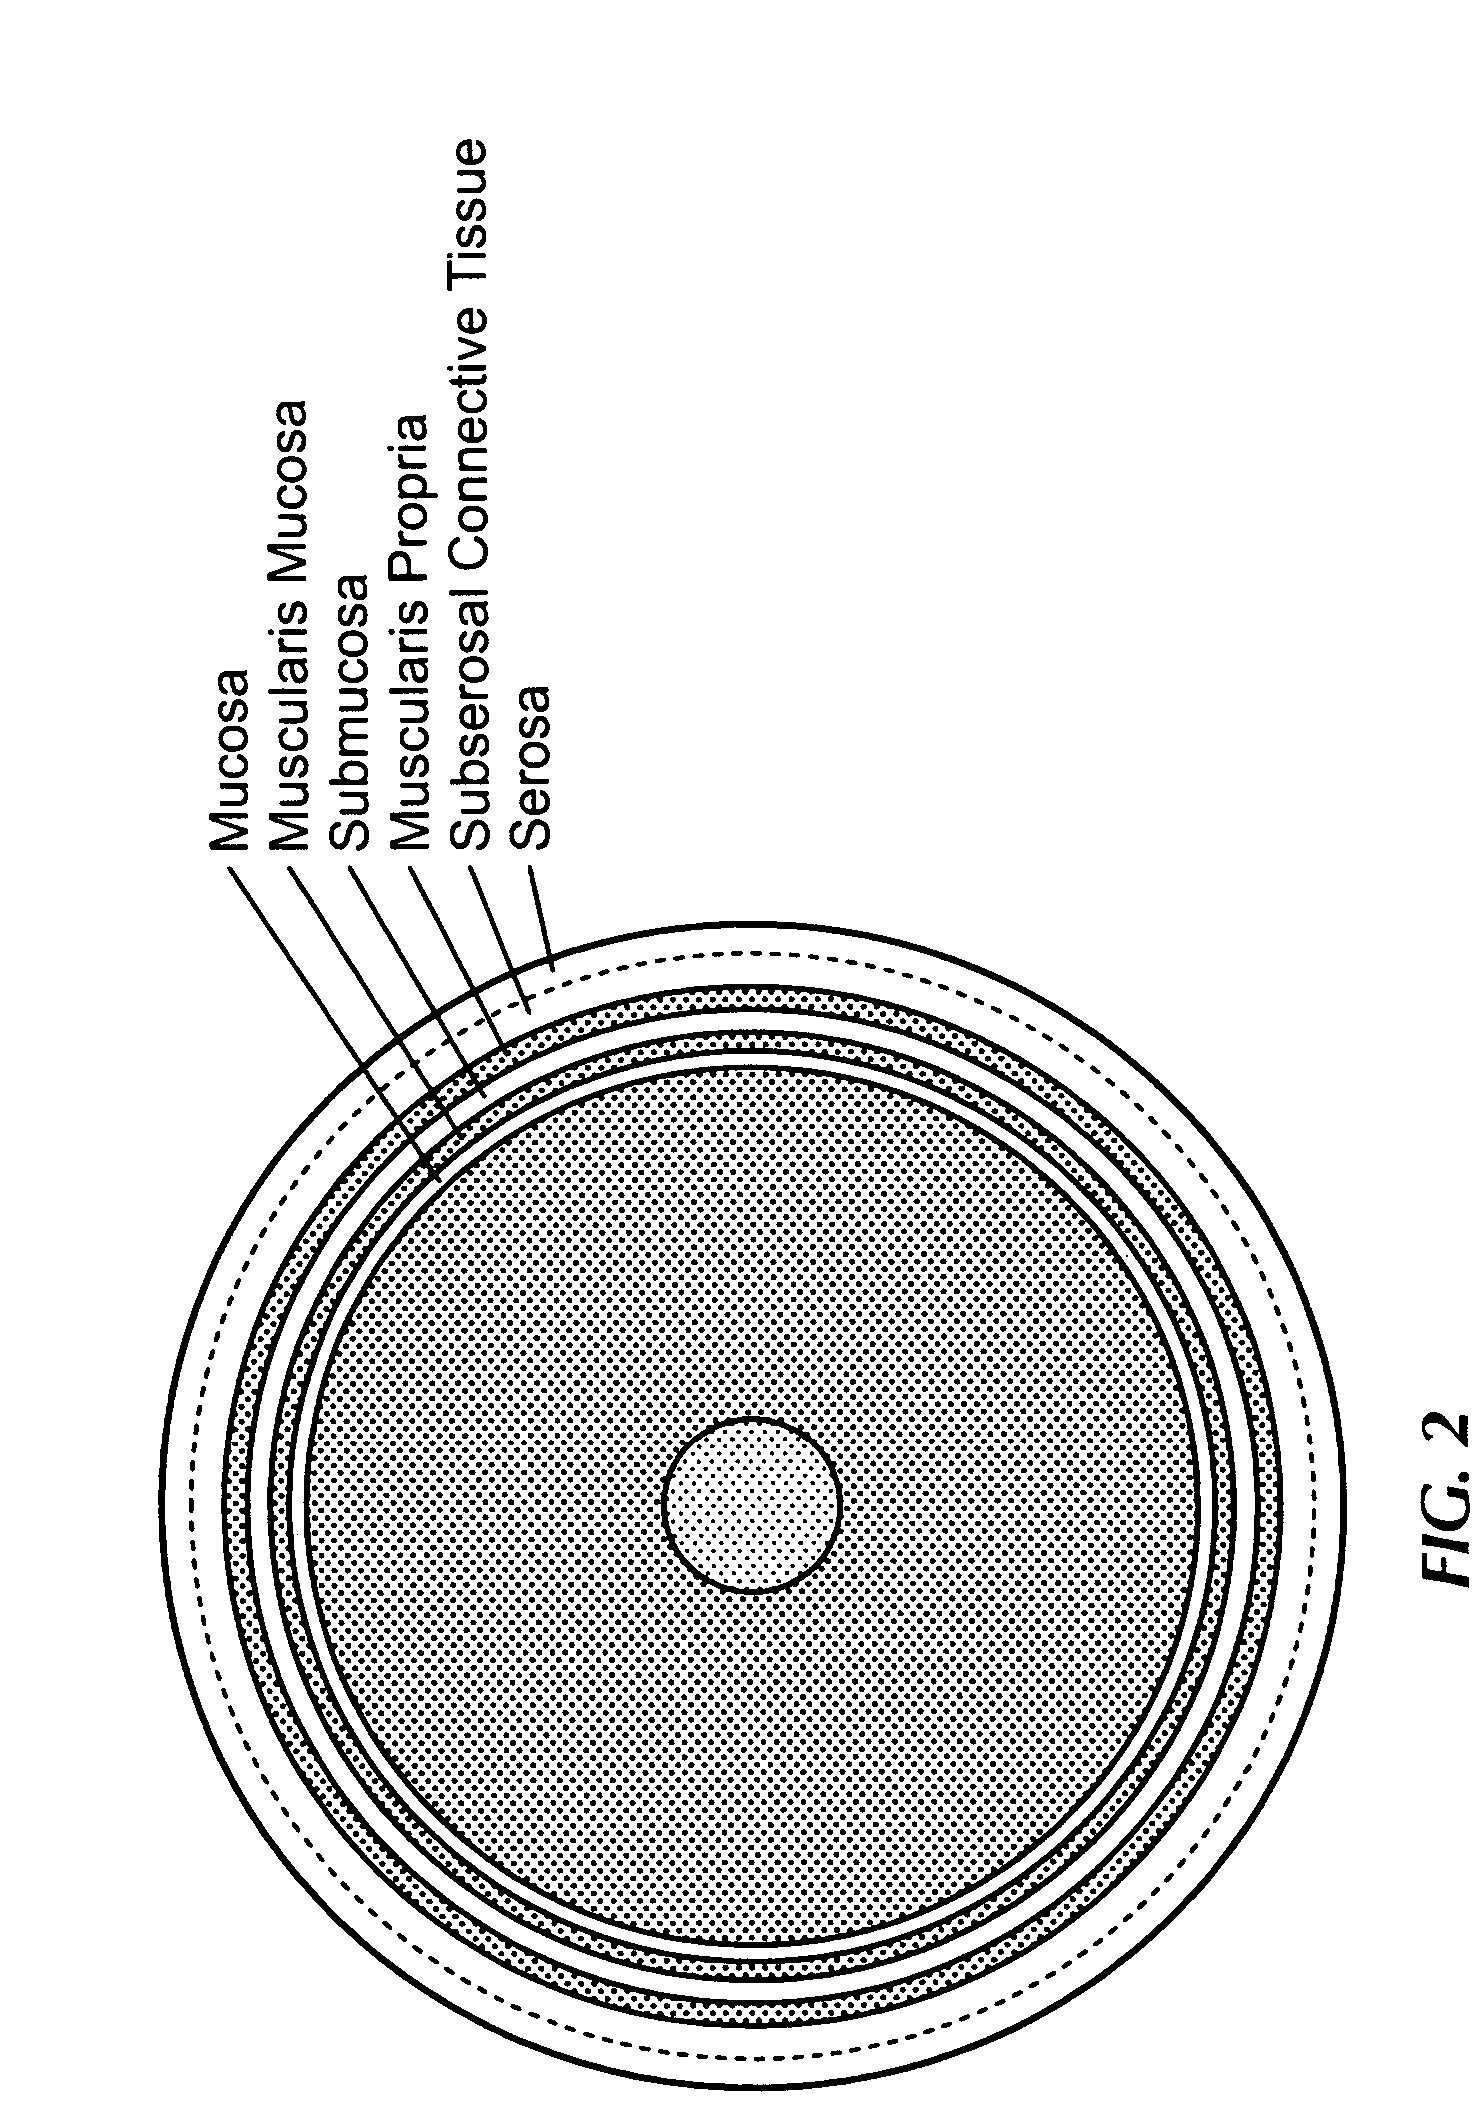 Method and apparatus for calibration, tracking and volume construction data for use in image-guided procedures